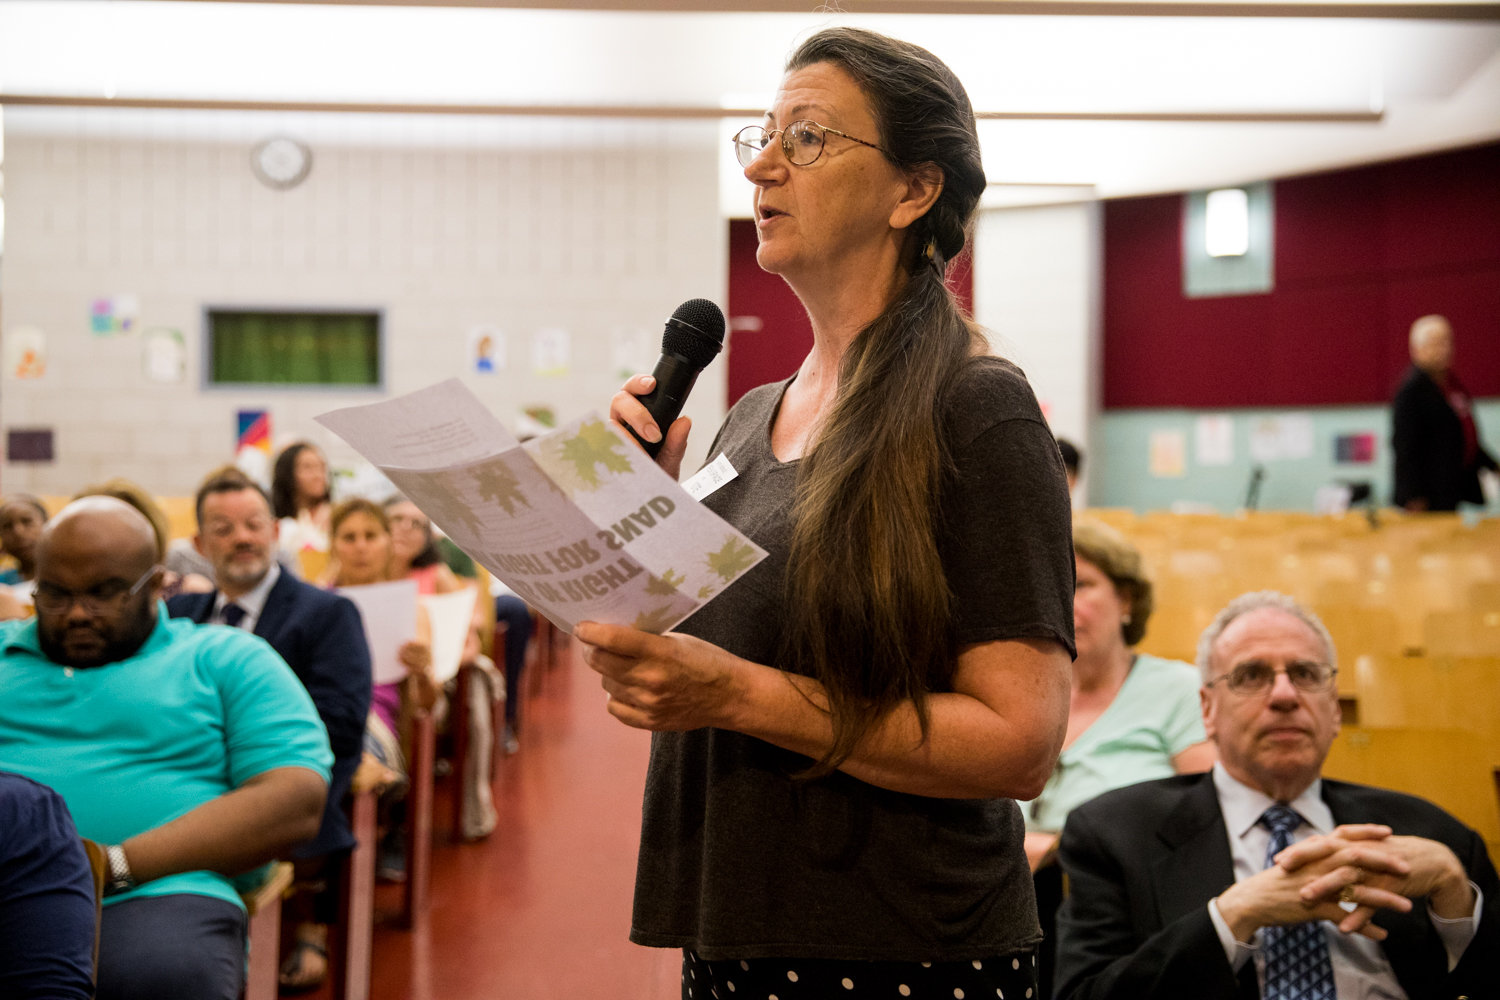 Jodie Colón, seen here at a Community Board 8 meeting last June, has been part of the grassroots effort to save the Villa Rosa Bonheur, a historic apartment building on Palisade Avenue in Spuyten Duyvil.